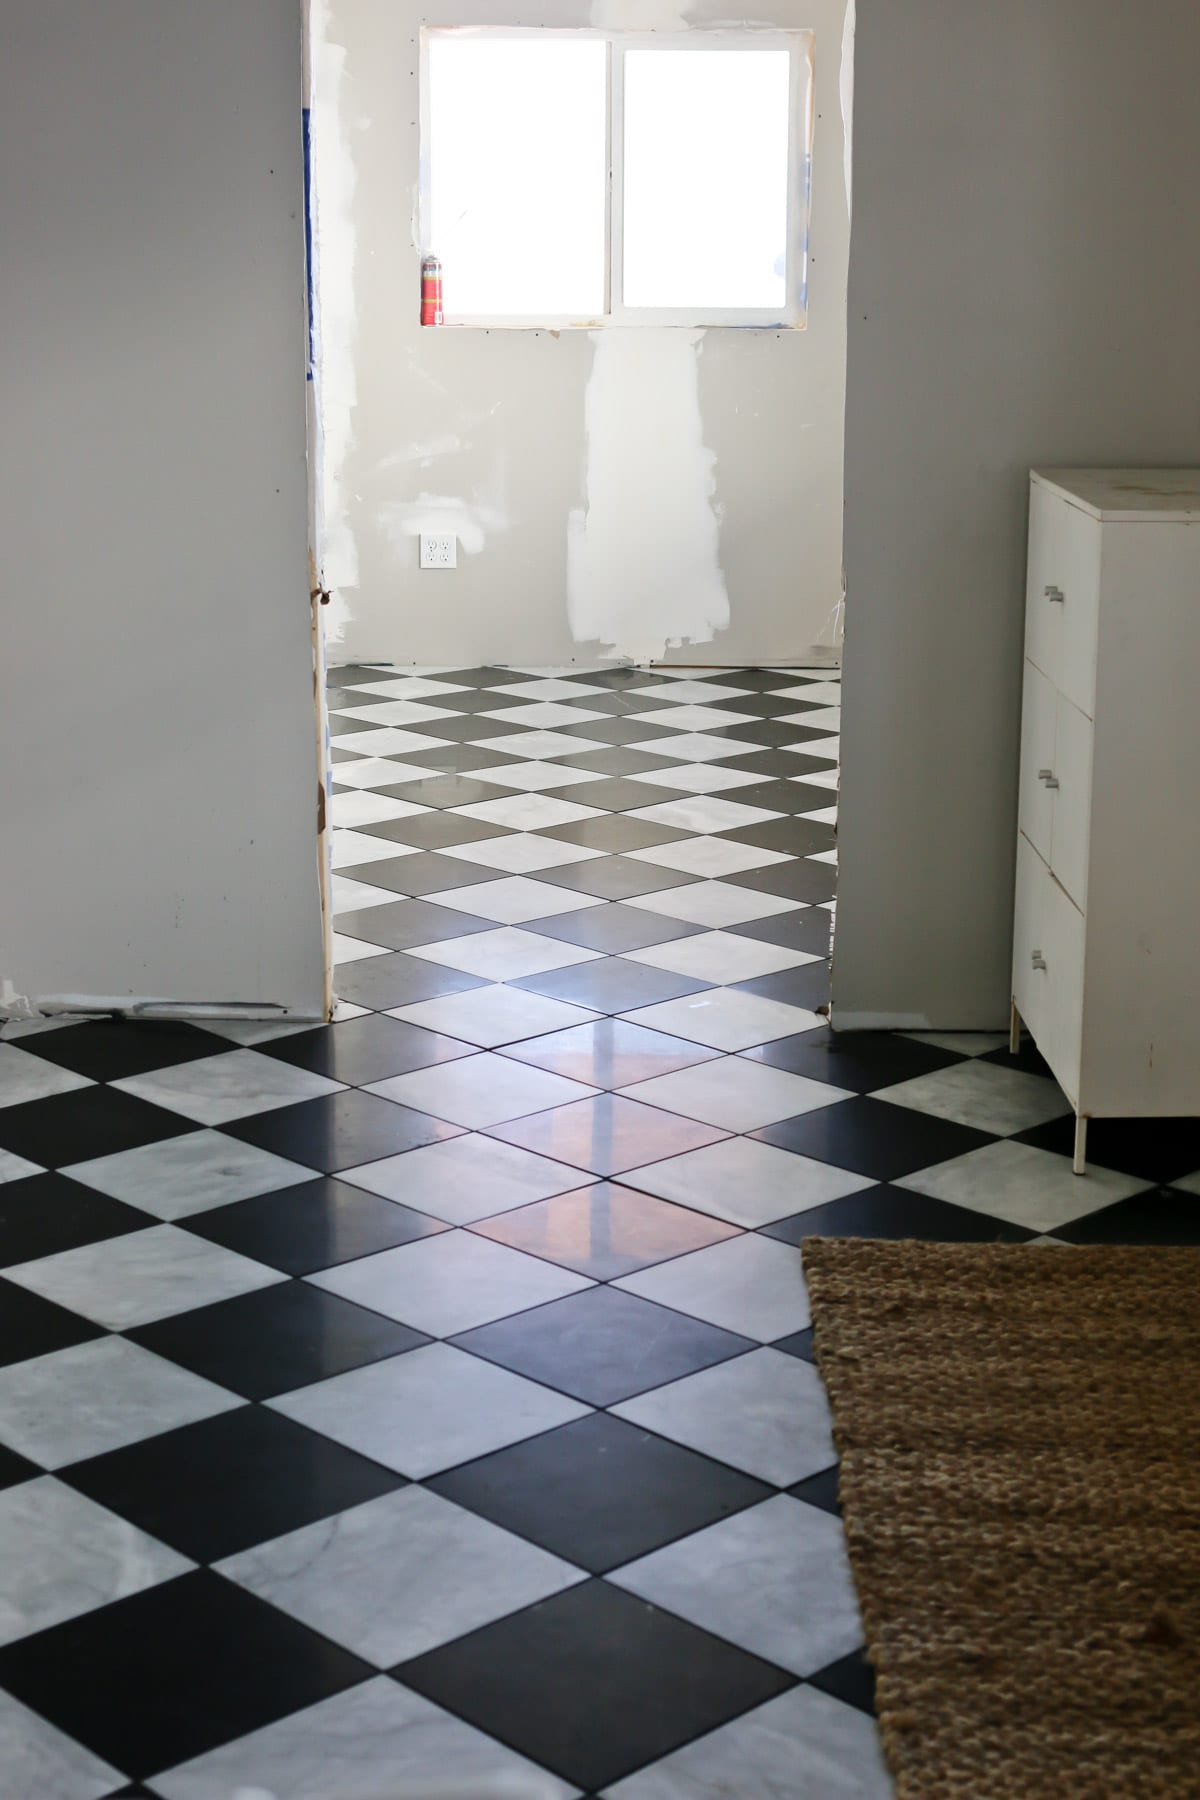 Checkerboard flooring in an office space